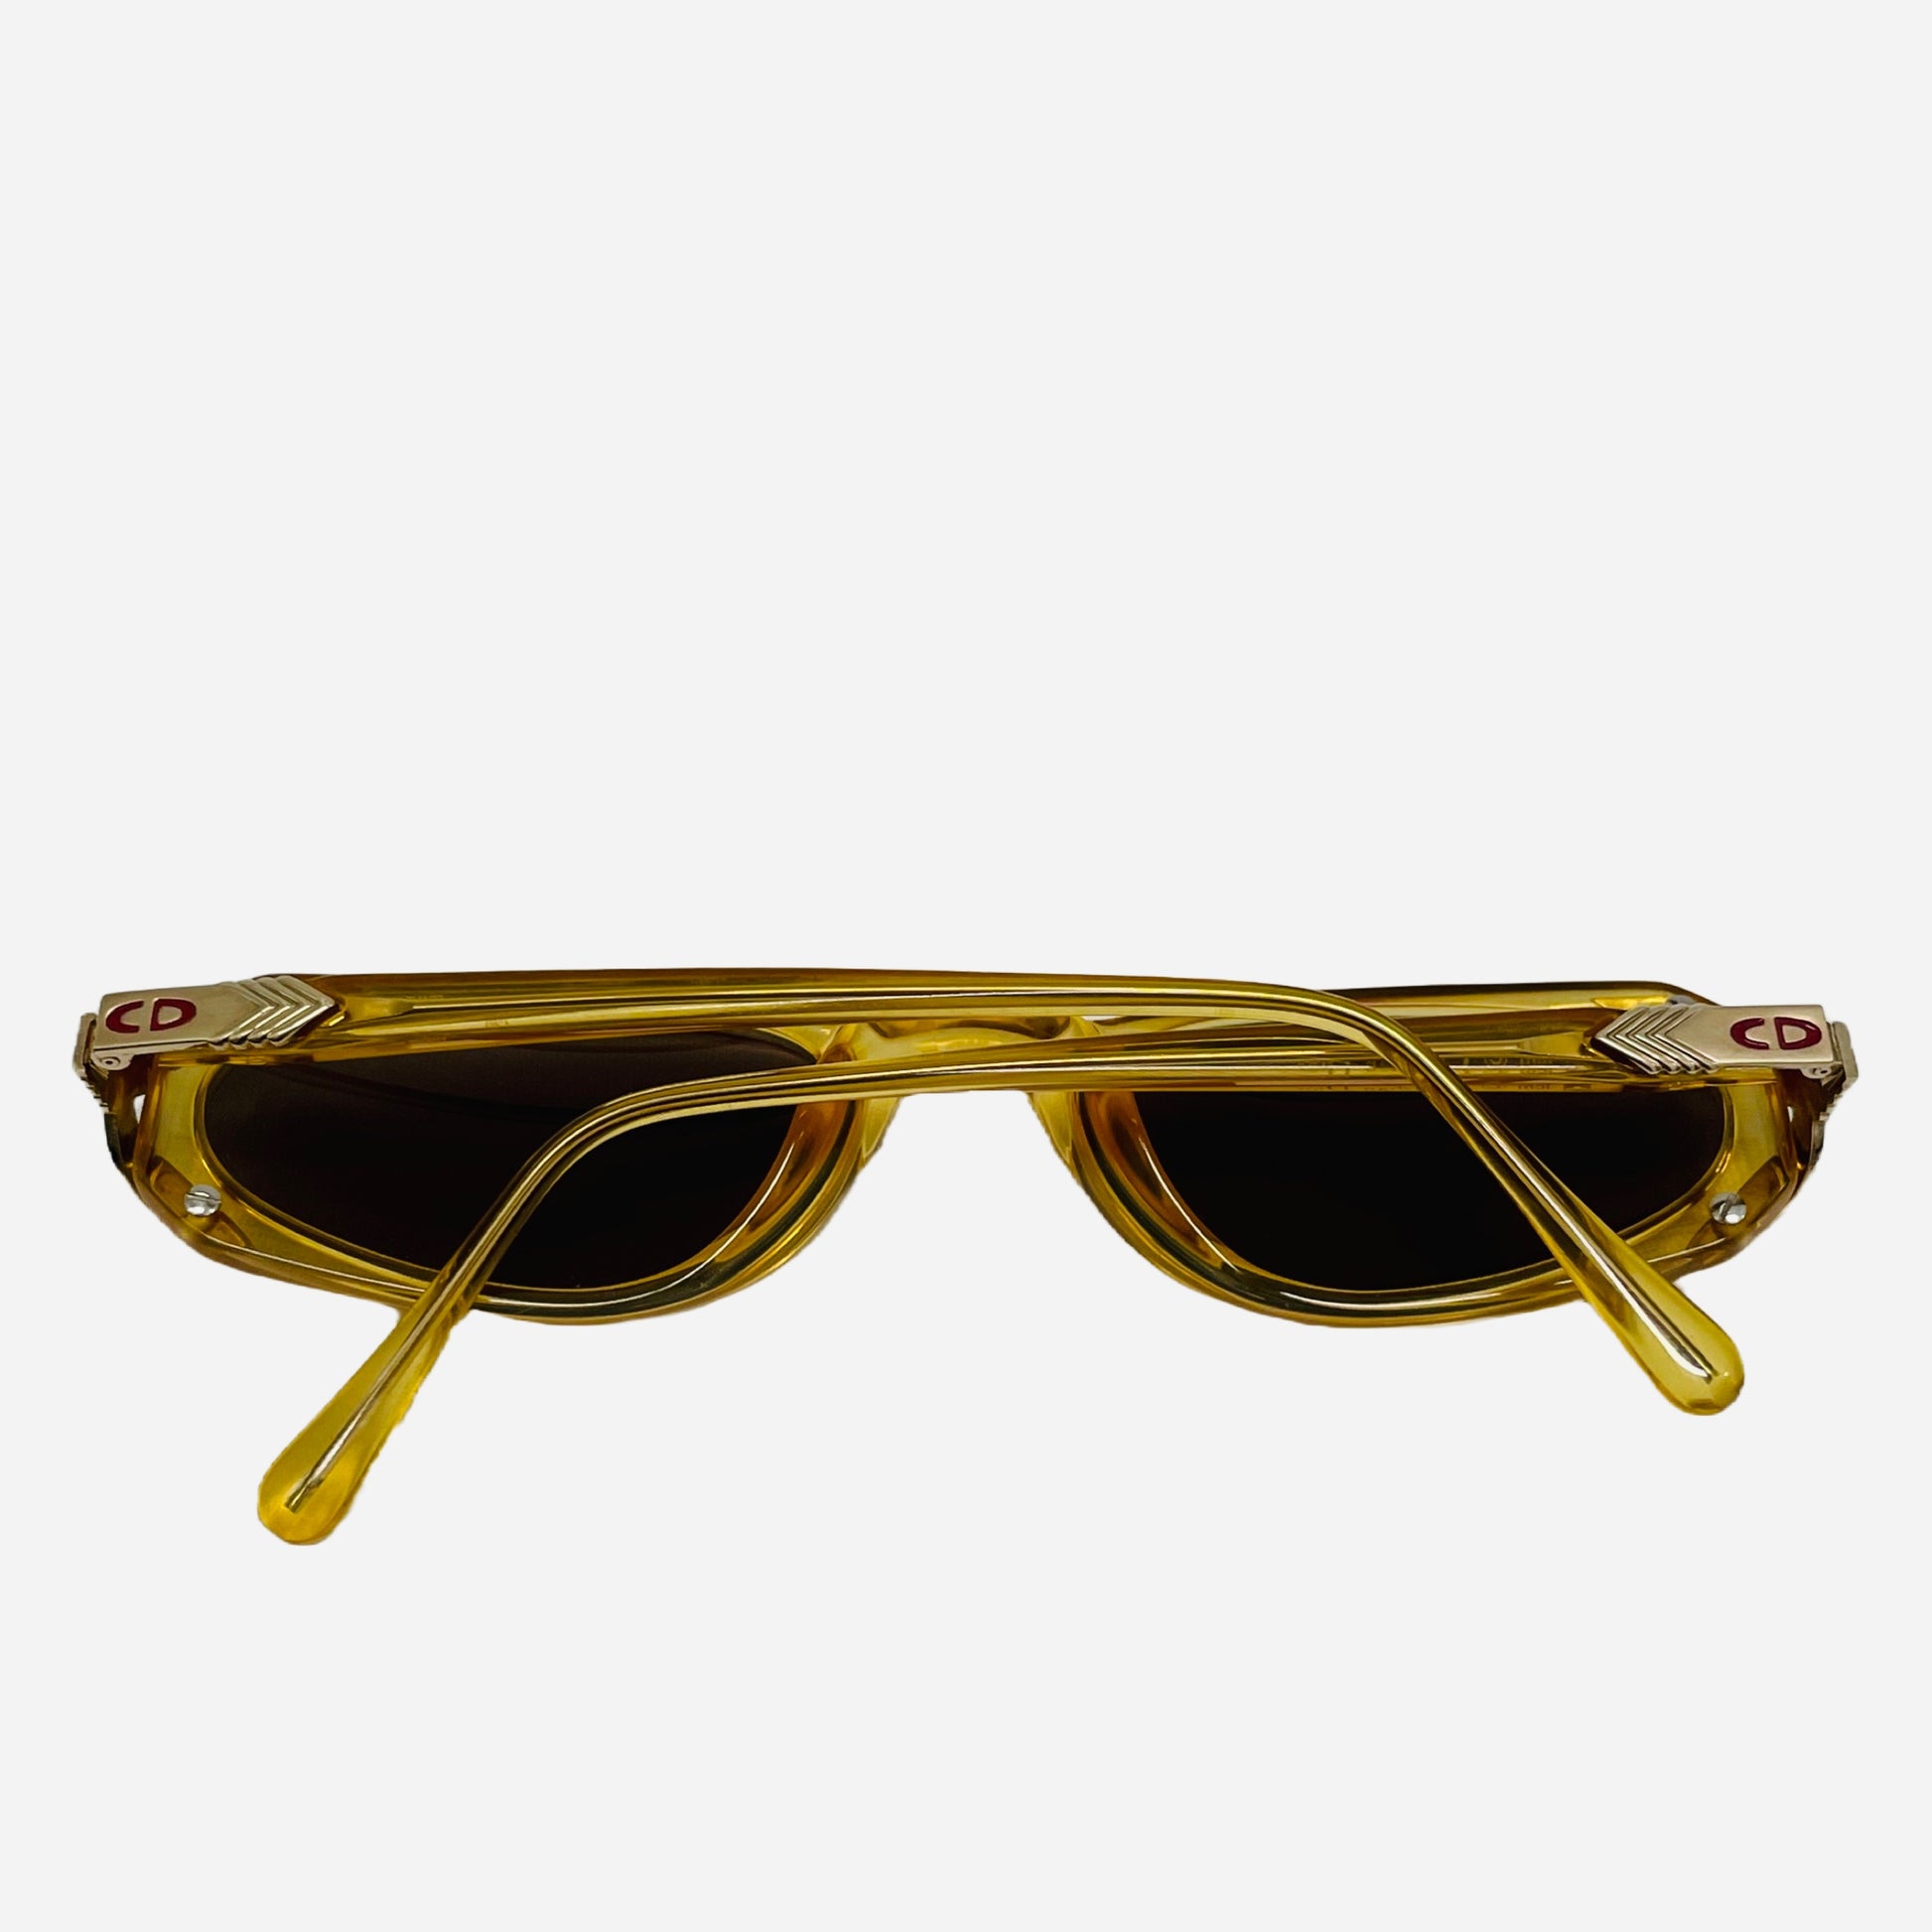 Vintage-Christian-Dior-Sonnenbrille-Sonnenbrille-2596-Optyl-the-seekers-back